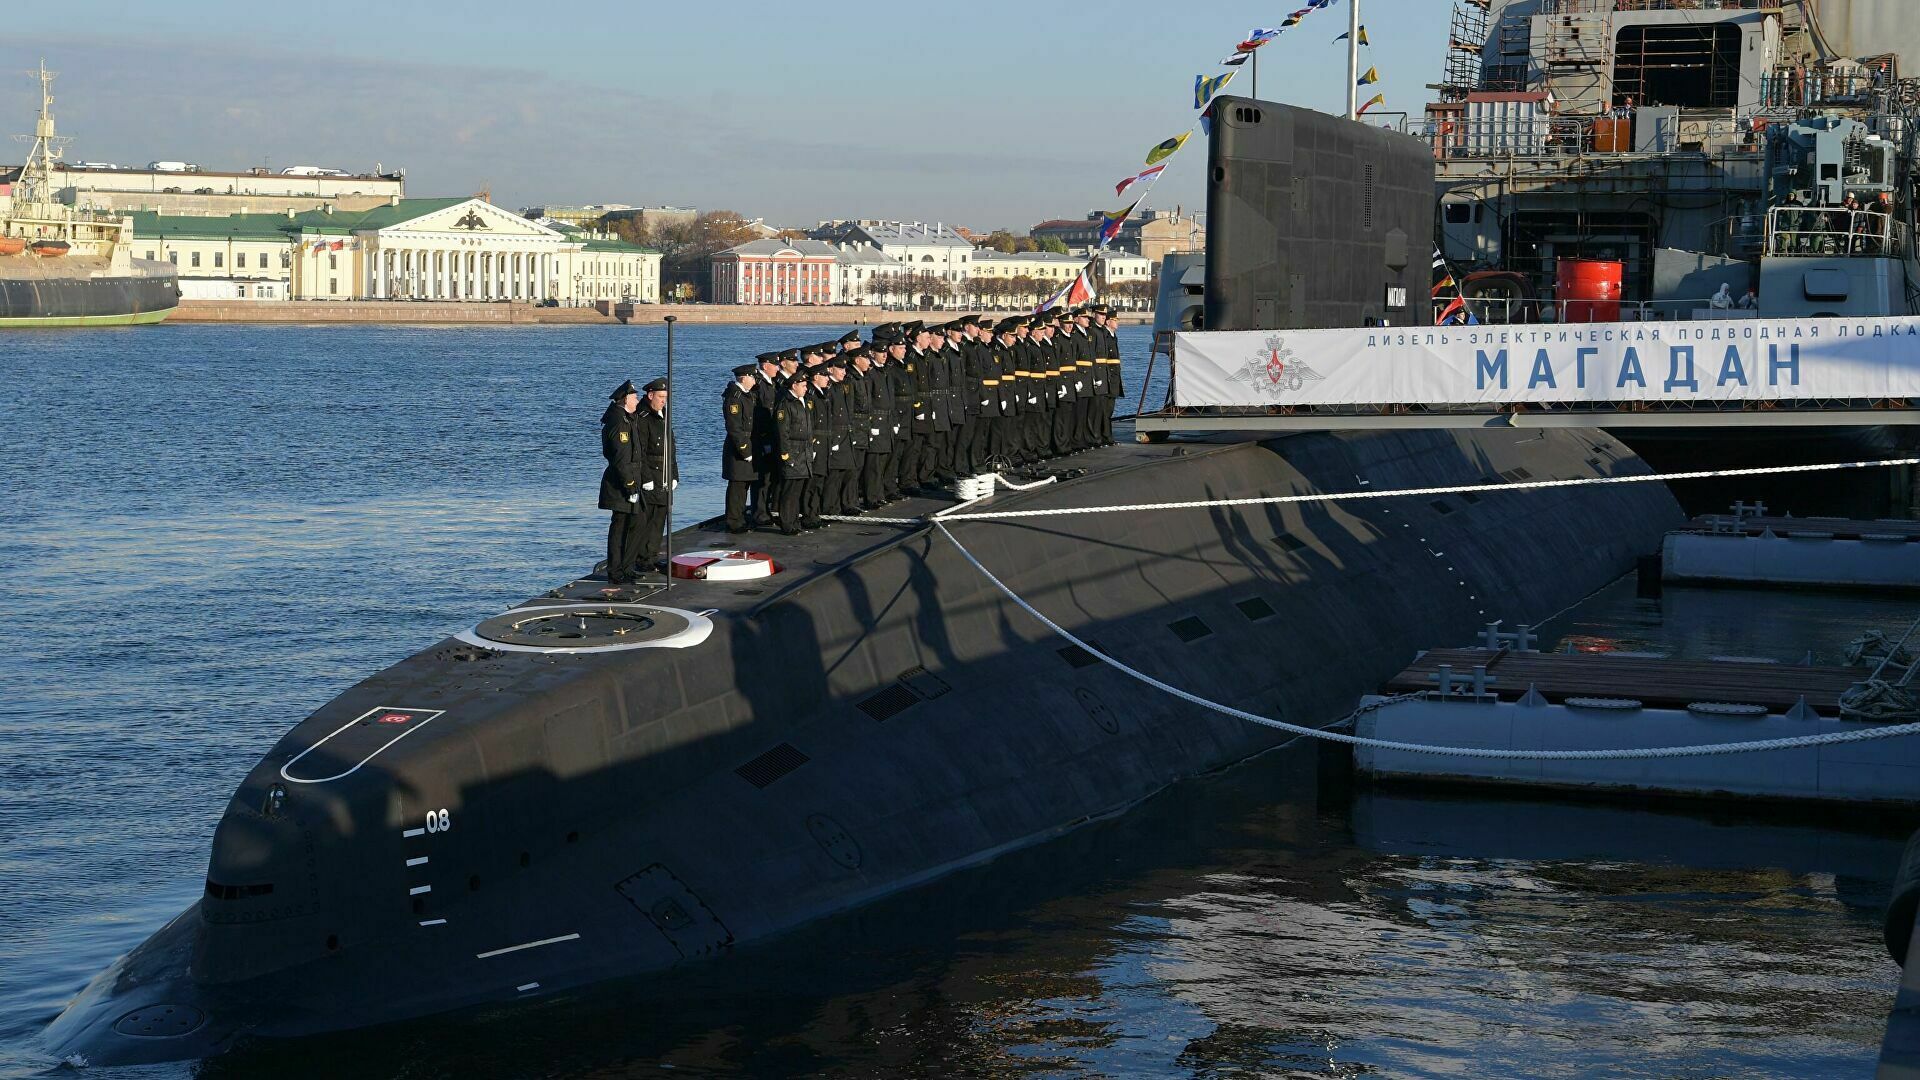 Submarine "Magadan" launched "Caliber" missiles in the Sea of Japan